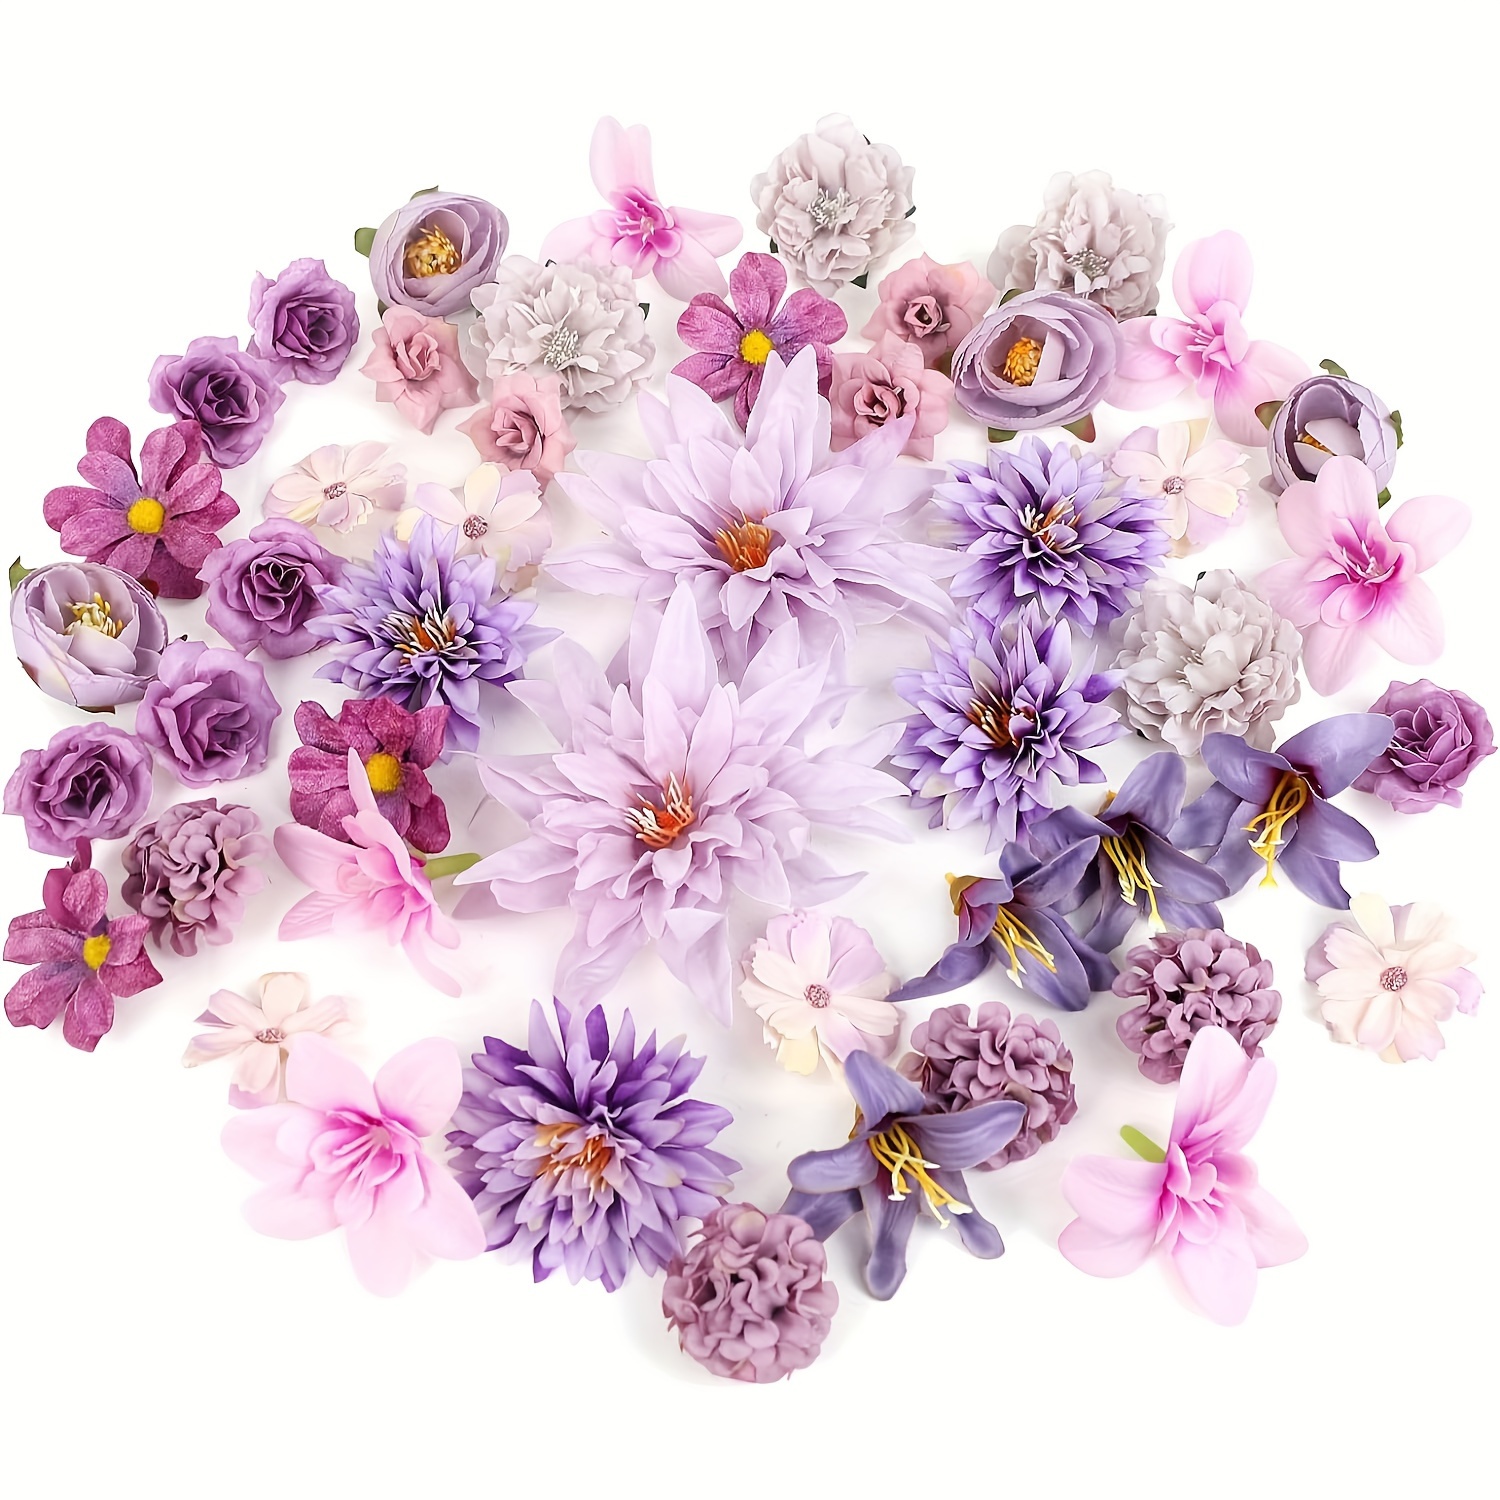 

48 Pcs Faux Flowers Heads Bulk - Artificial Rose Daisy Heads Silk Fake Flower Diy Cake Wreath Garland Bouquets For Wedding Crafts Bridal Party Baby Shower Home Decoration (purple)